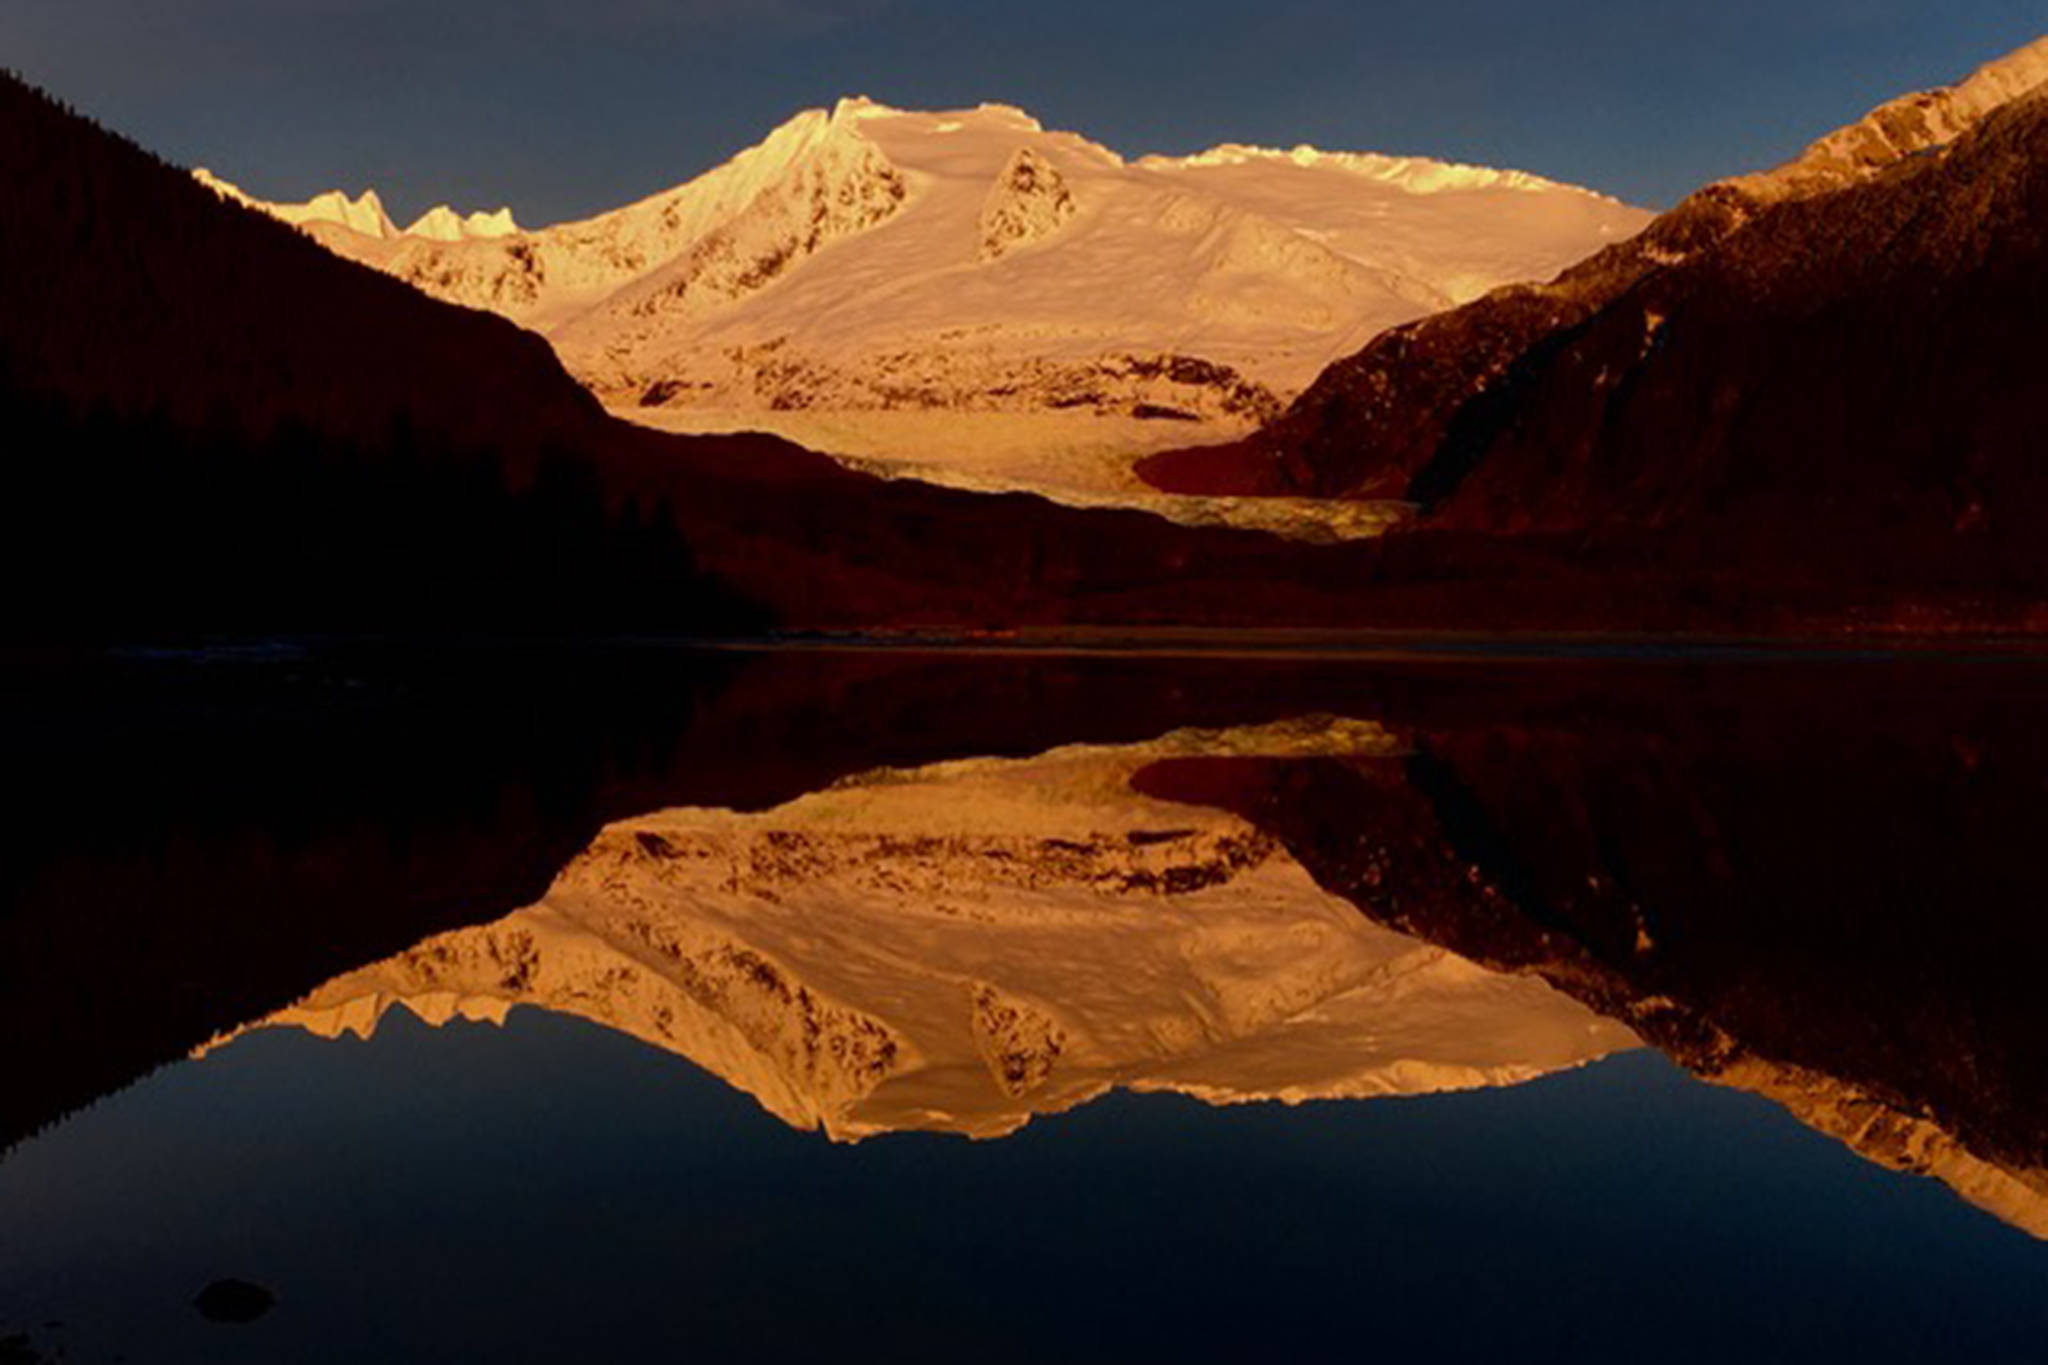 This Dec. 9 photo shows a gold-tinged reflection in Mendenhall Lake. (Courtesy Photo / Linda Buckley)